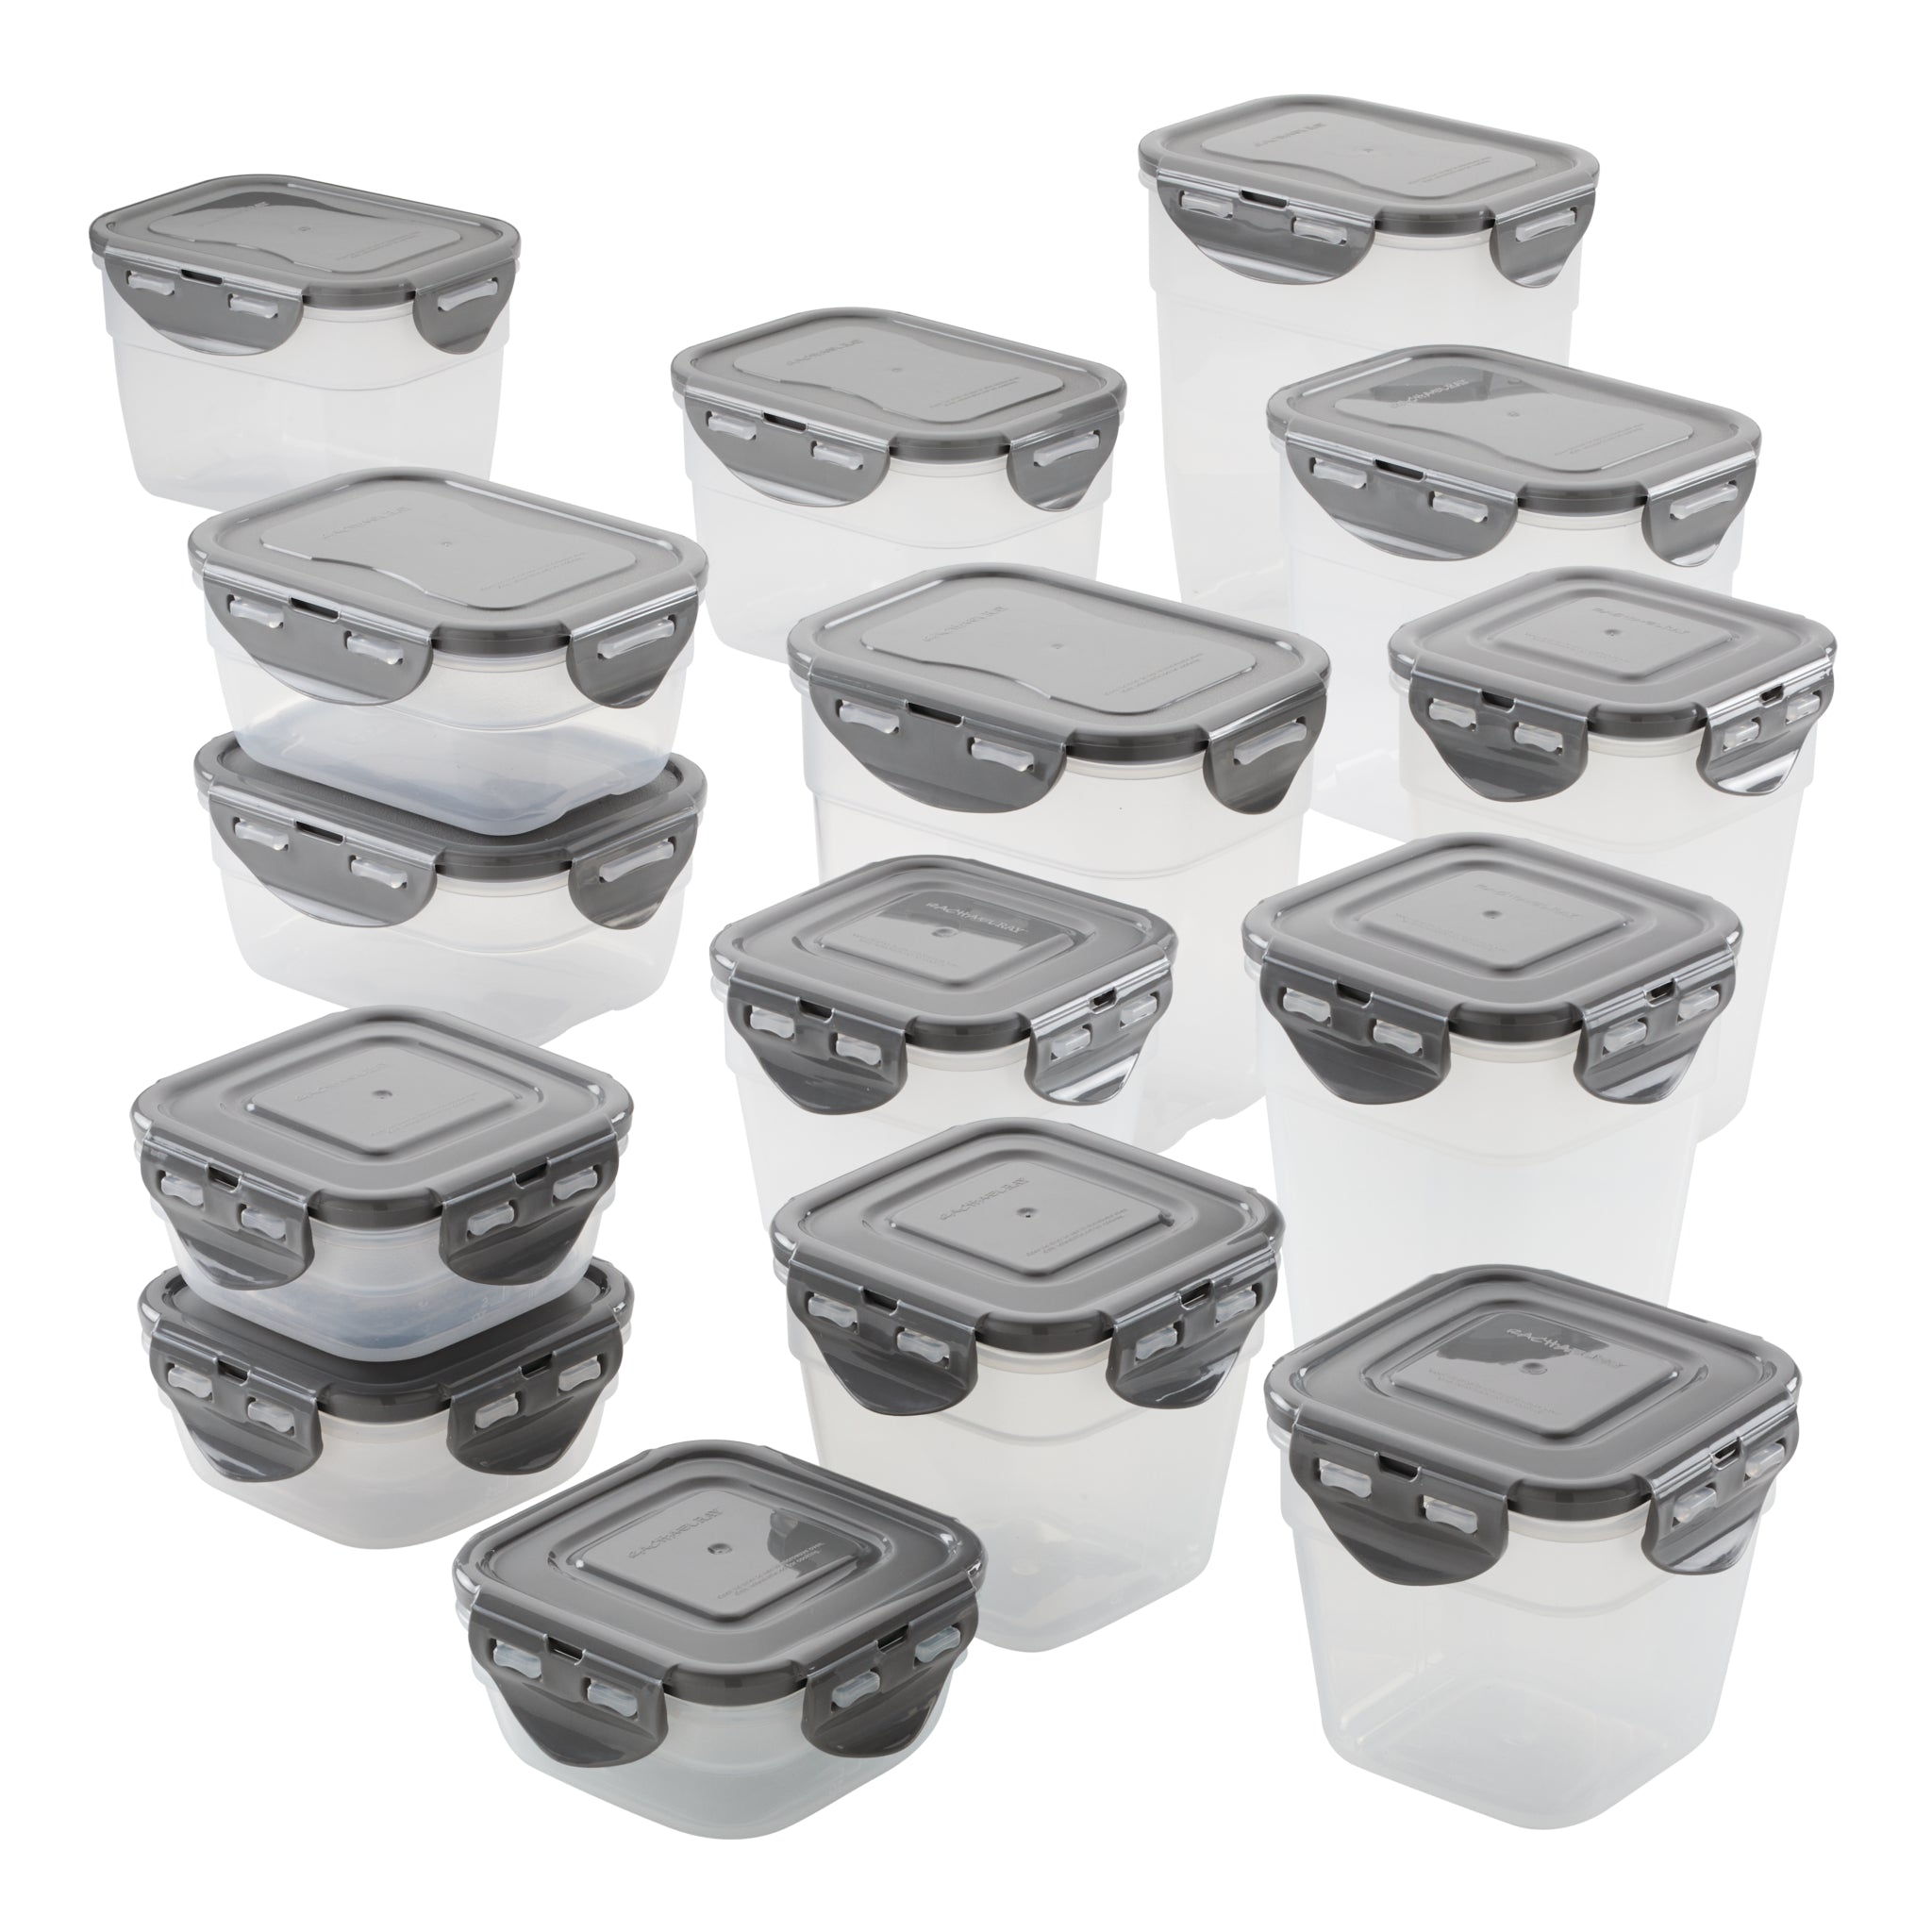 Rubbermaid 24-Piece Food Storage Set with Easy Find Lids, Clear